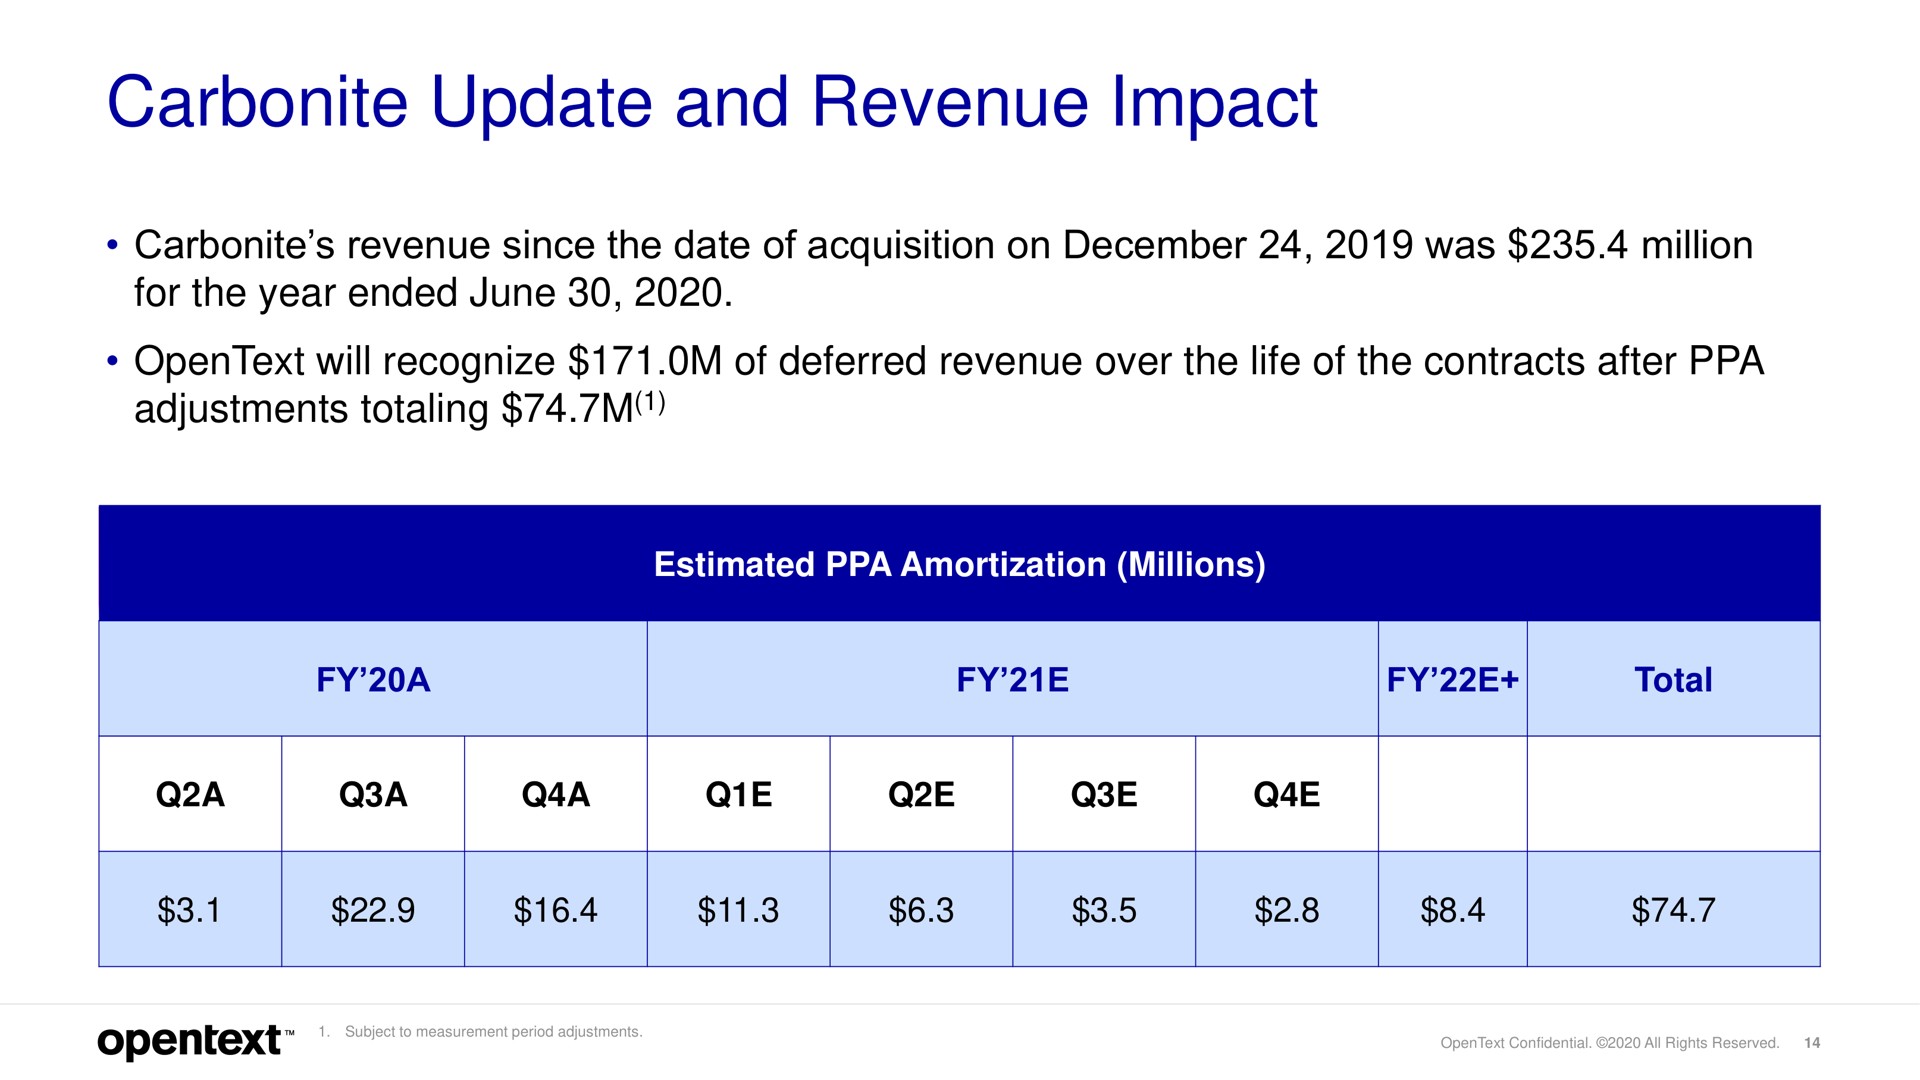 carbonite update and revenue impact carbonite revenue since the date of acquisition on was million for the year ended june will recognize of deferred revenue over the life of the contracts after adjustments totaling | OpenText